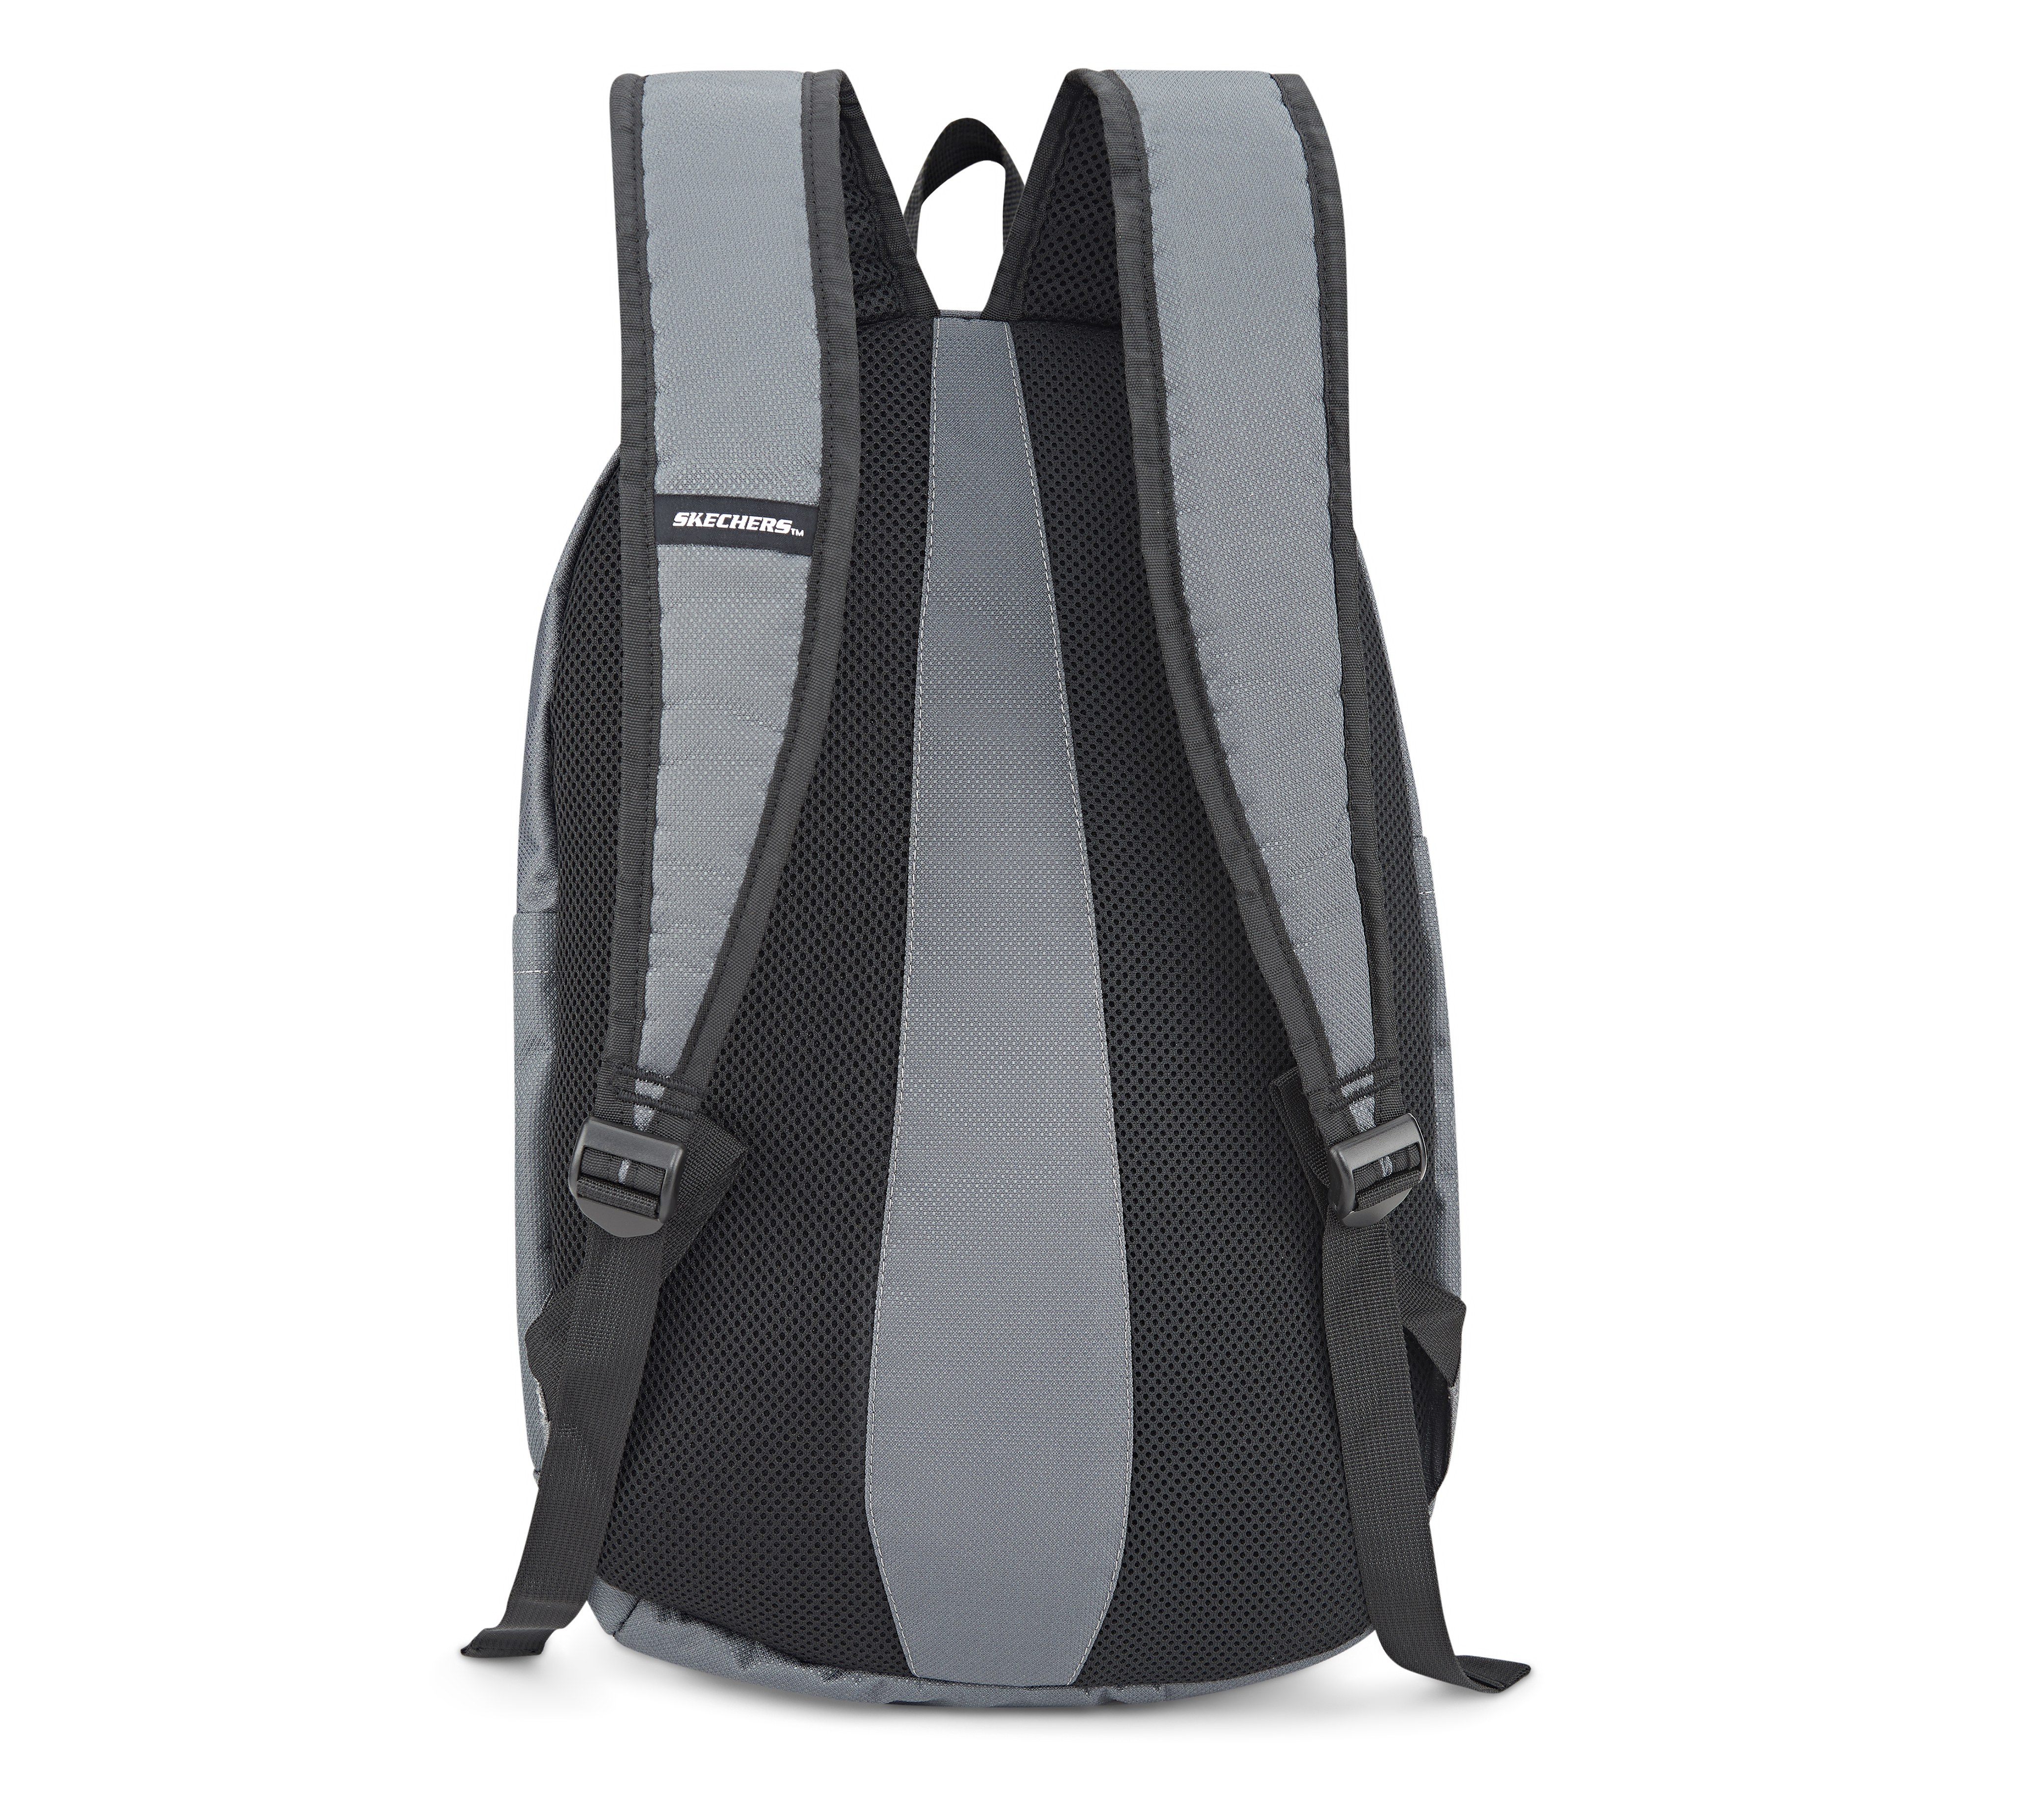 LAPTOP BAG WITH TWIN POCKETS, GREY Accessories Left View